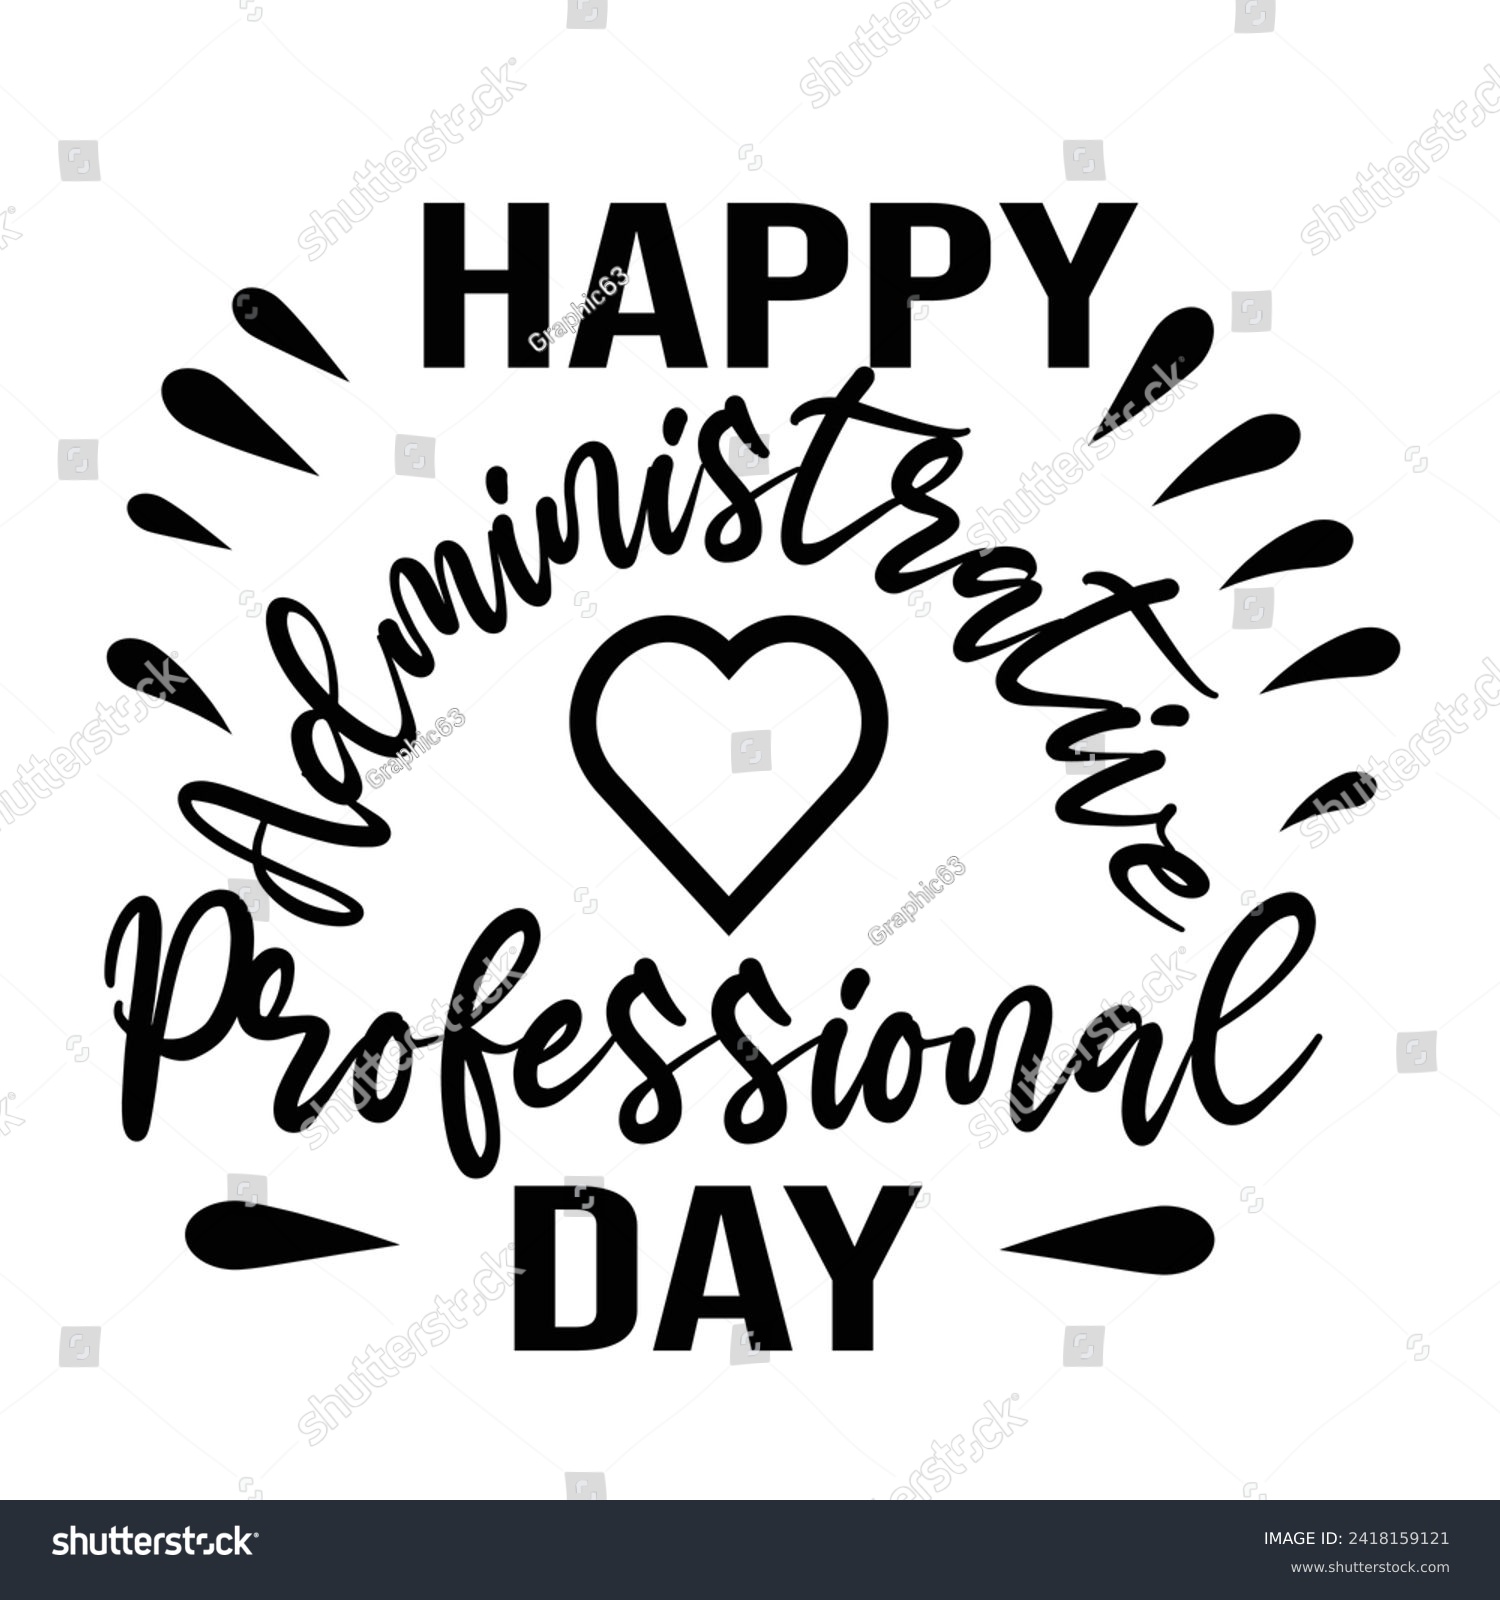 SVG of Happy Administrative Professional Day Typography Design For T Shirt Poster Banner Backround Print Vector Eps Illustrations Template... svg